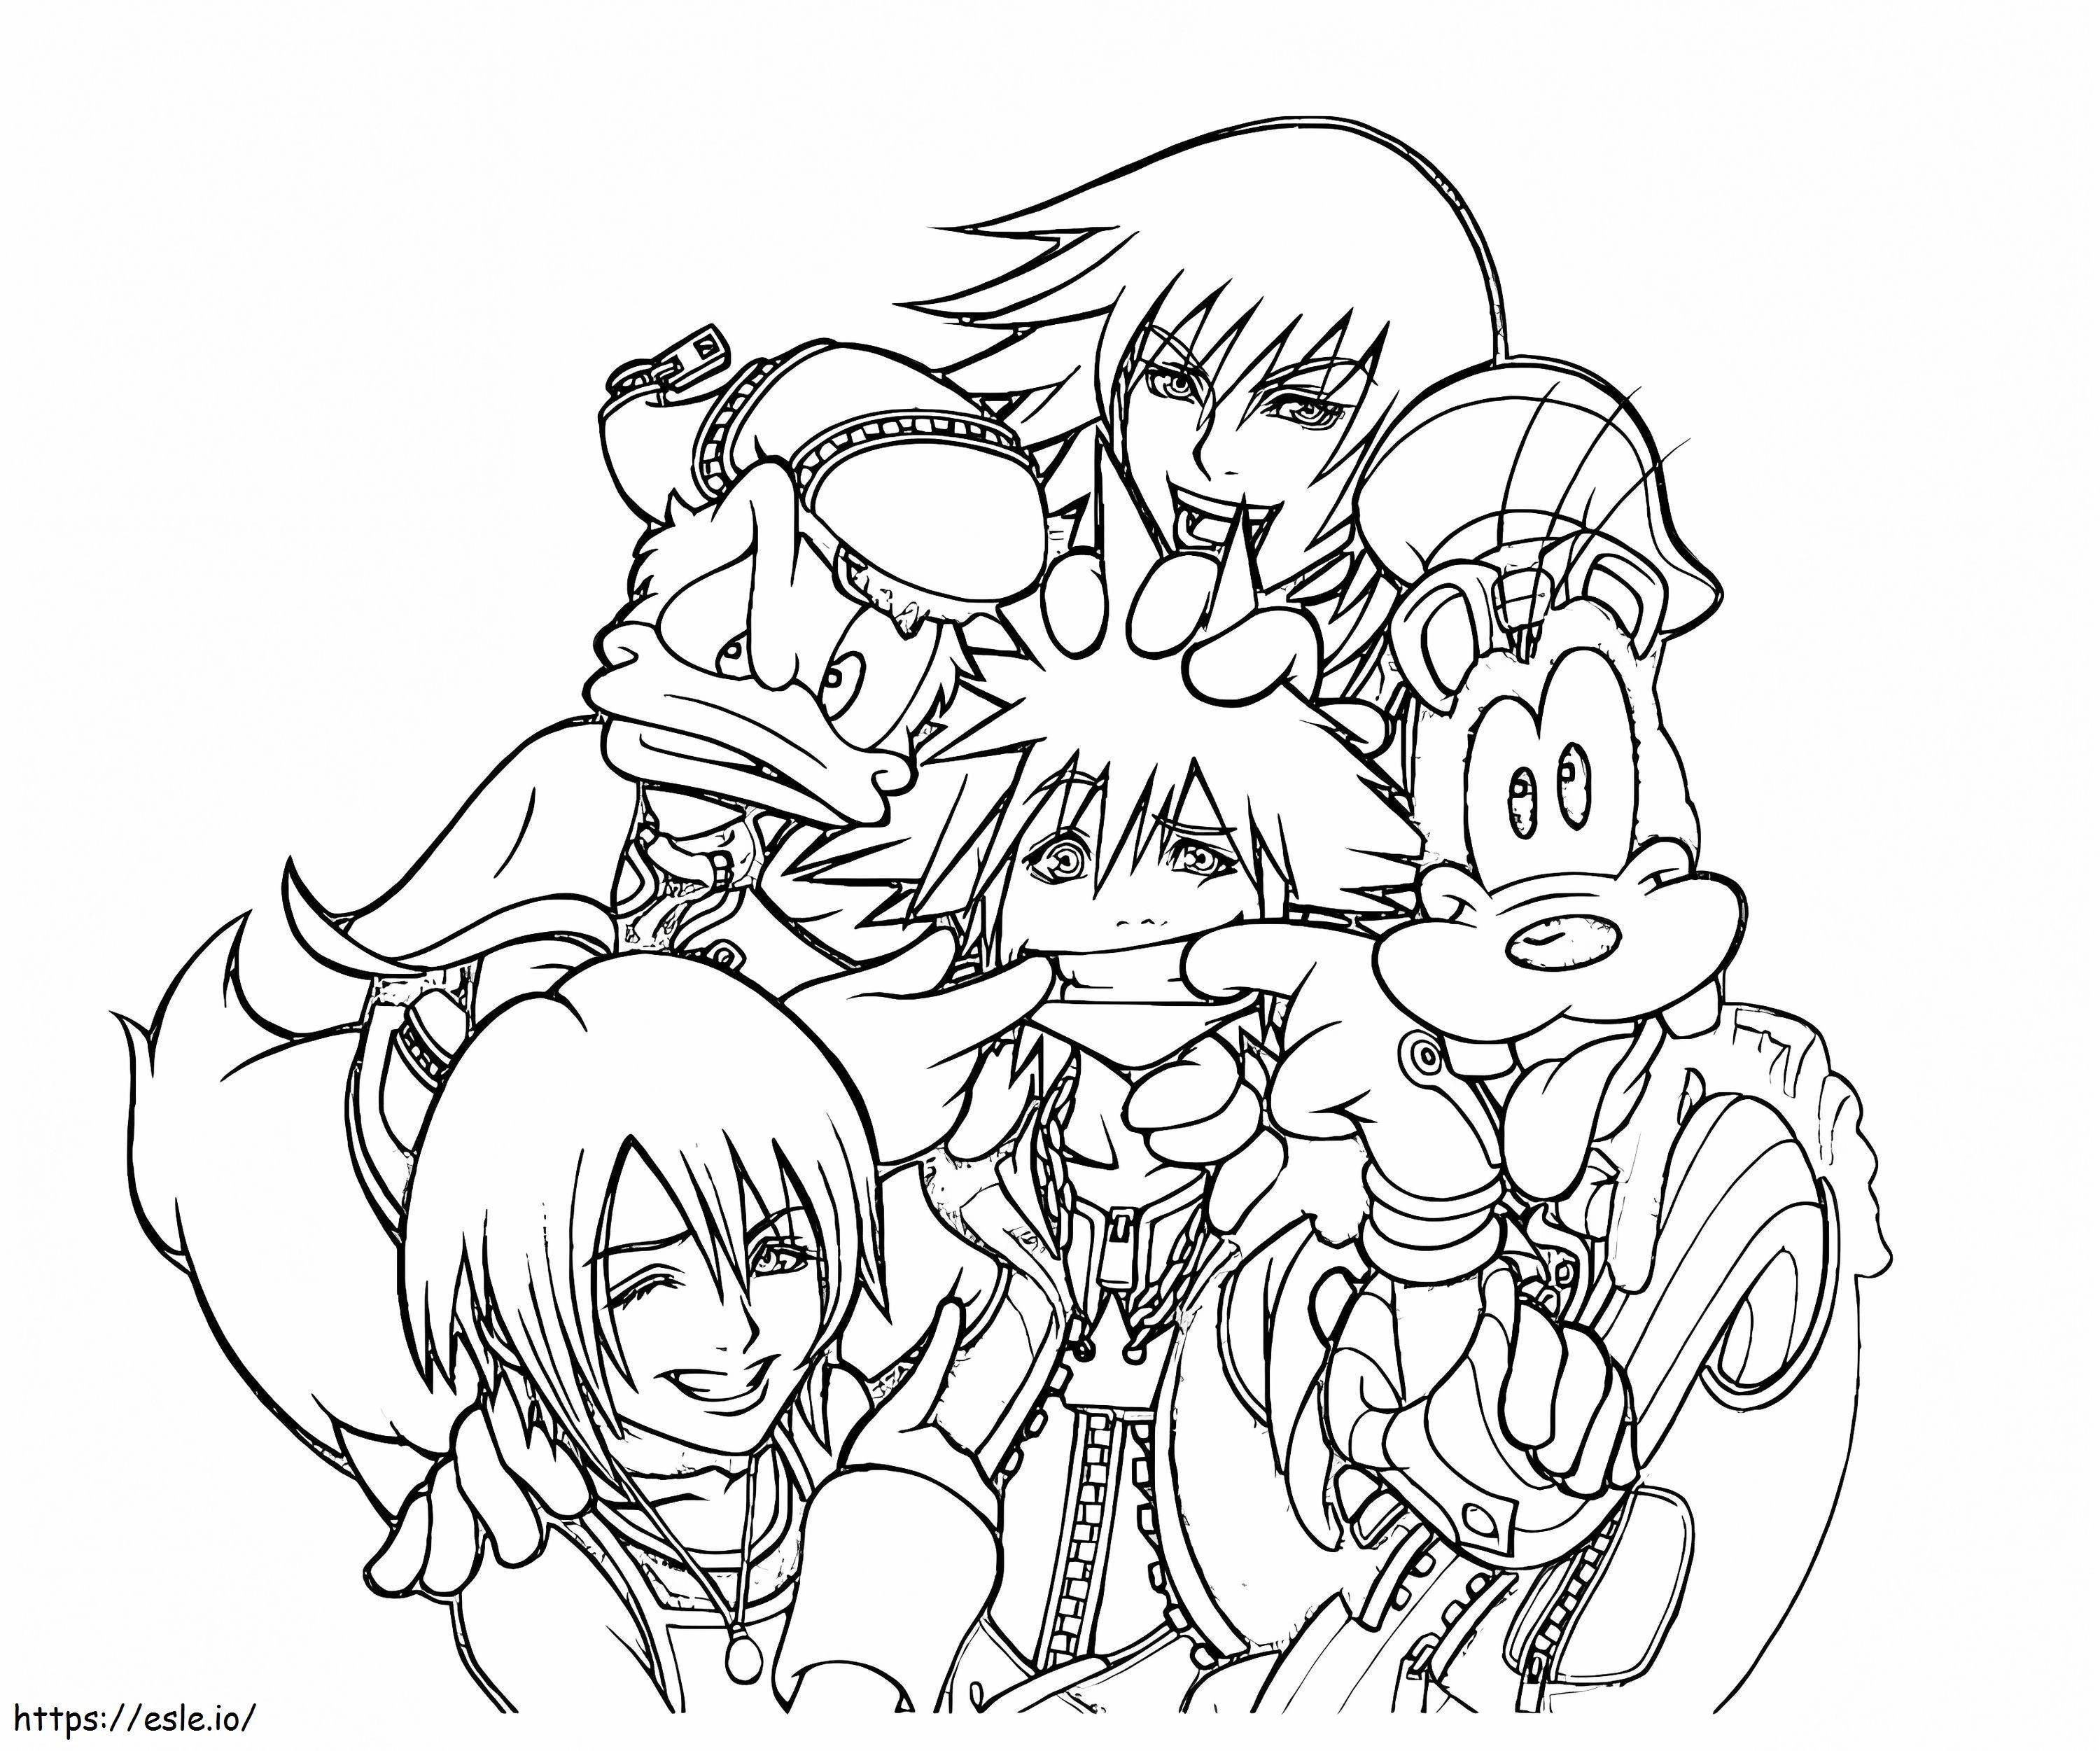 Kingdom Hearts Funny Characters coloring page